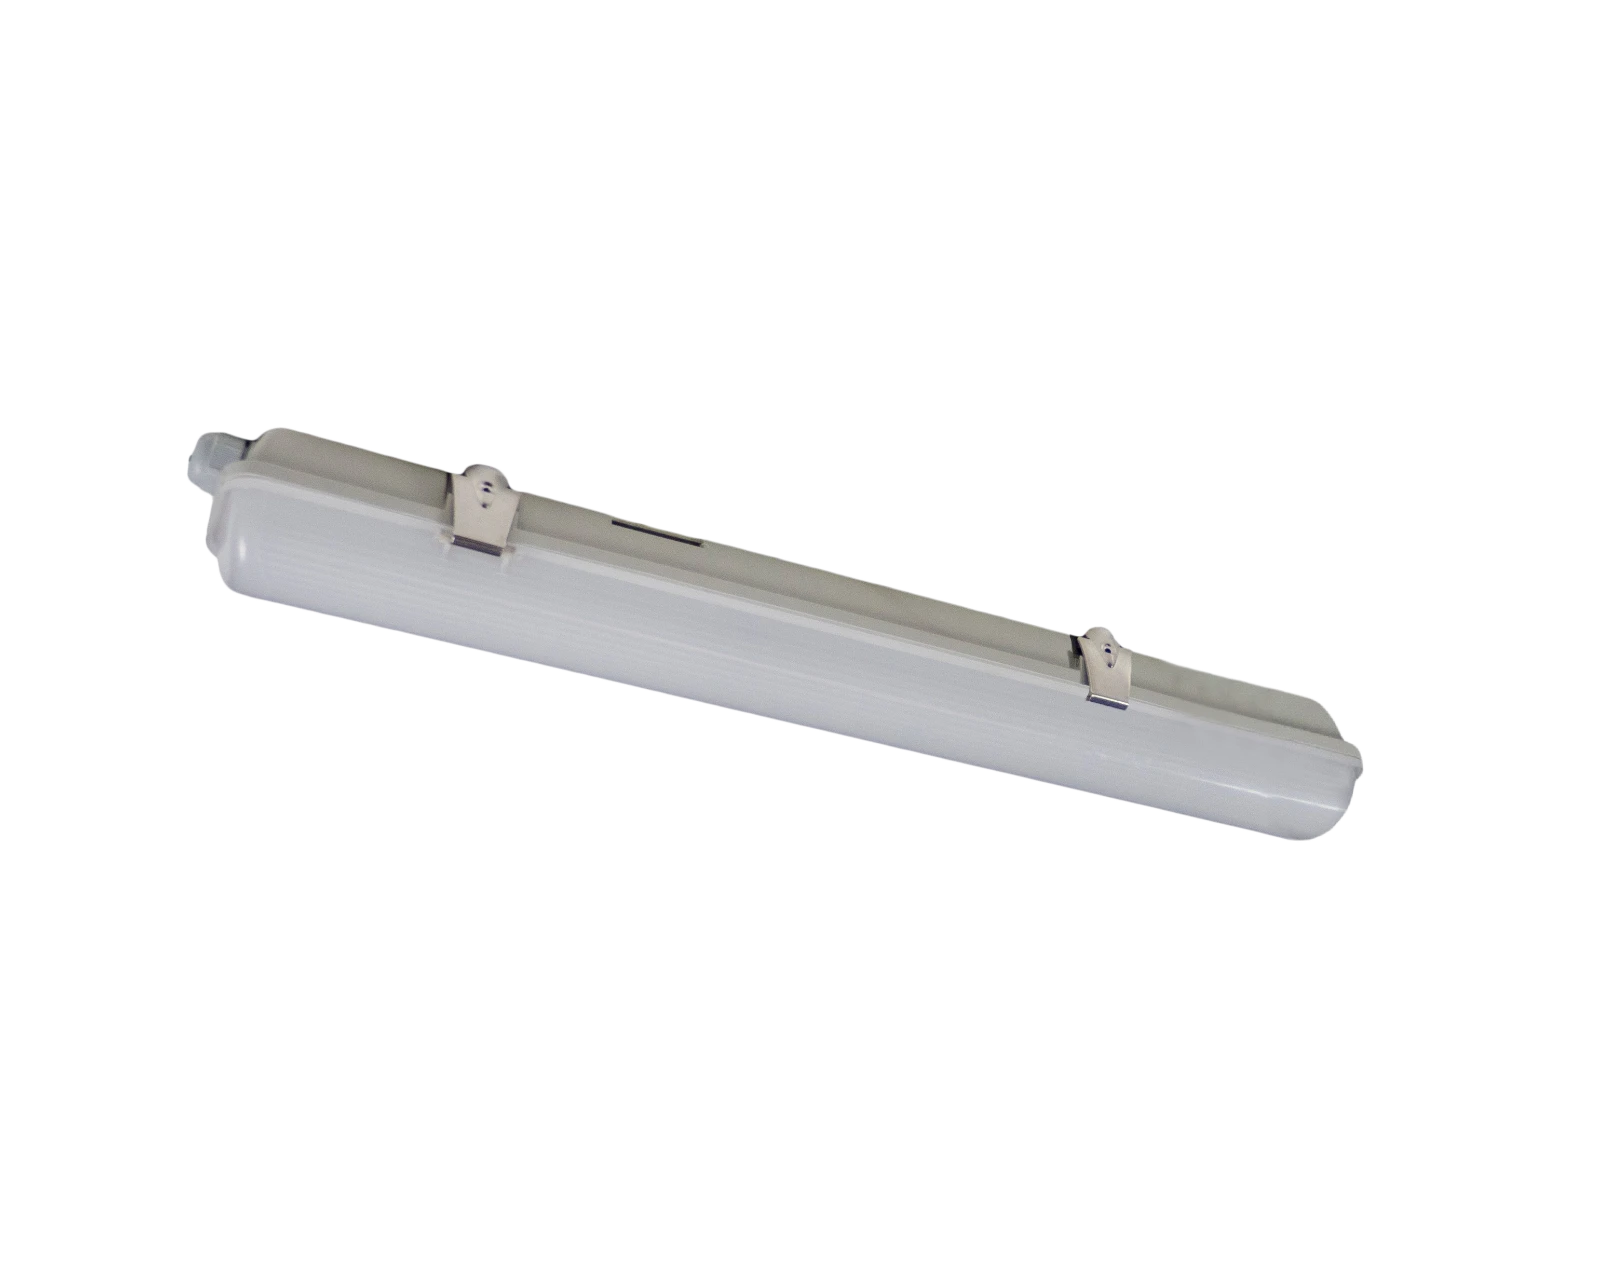 4FT 5FT 6FT WEATHERPROOF LIGHT FLUORESCENT SINGLE TWIN NON CORROSIVE ROBUST NEW 